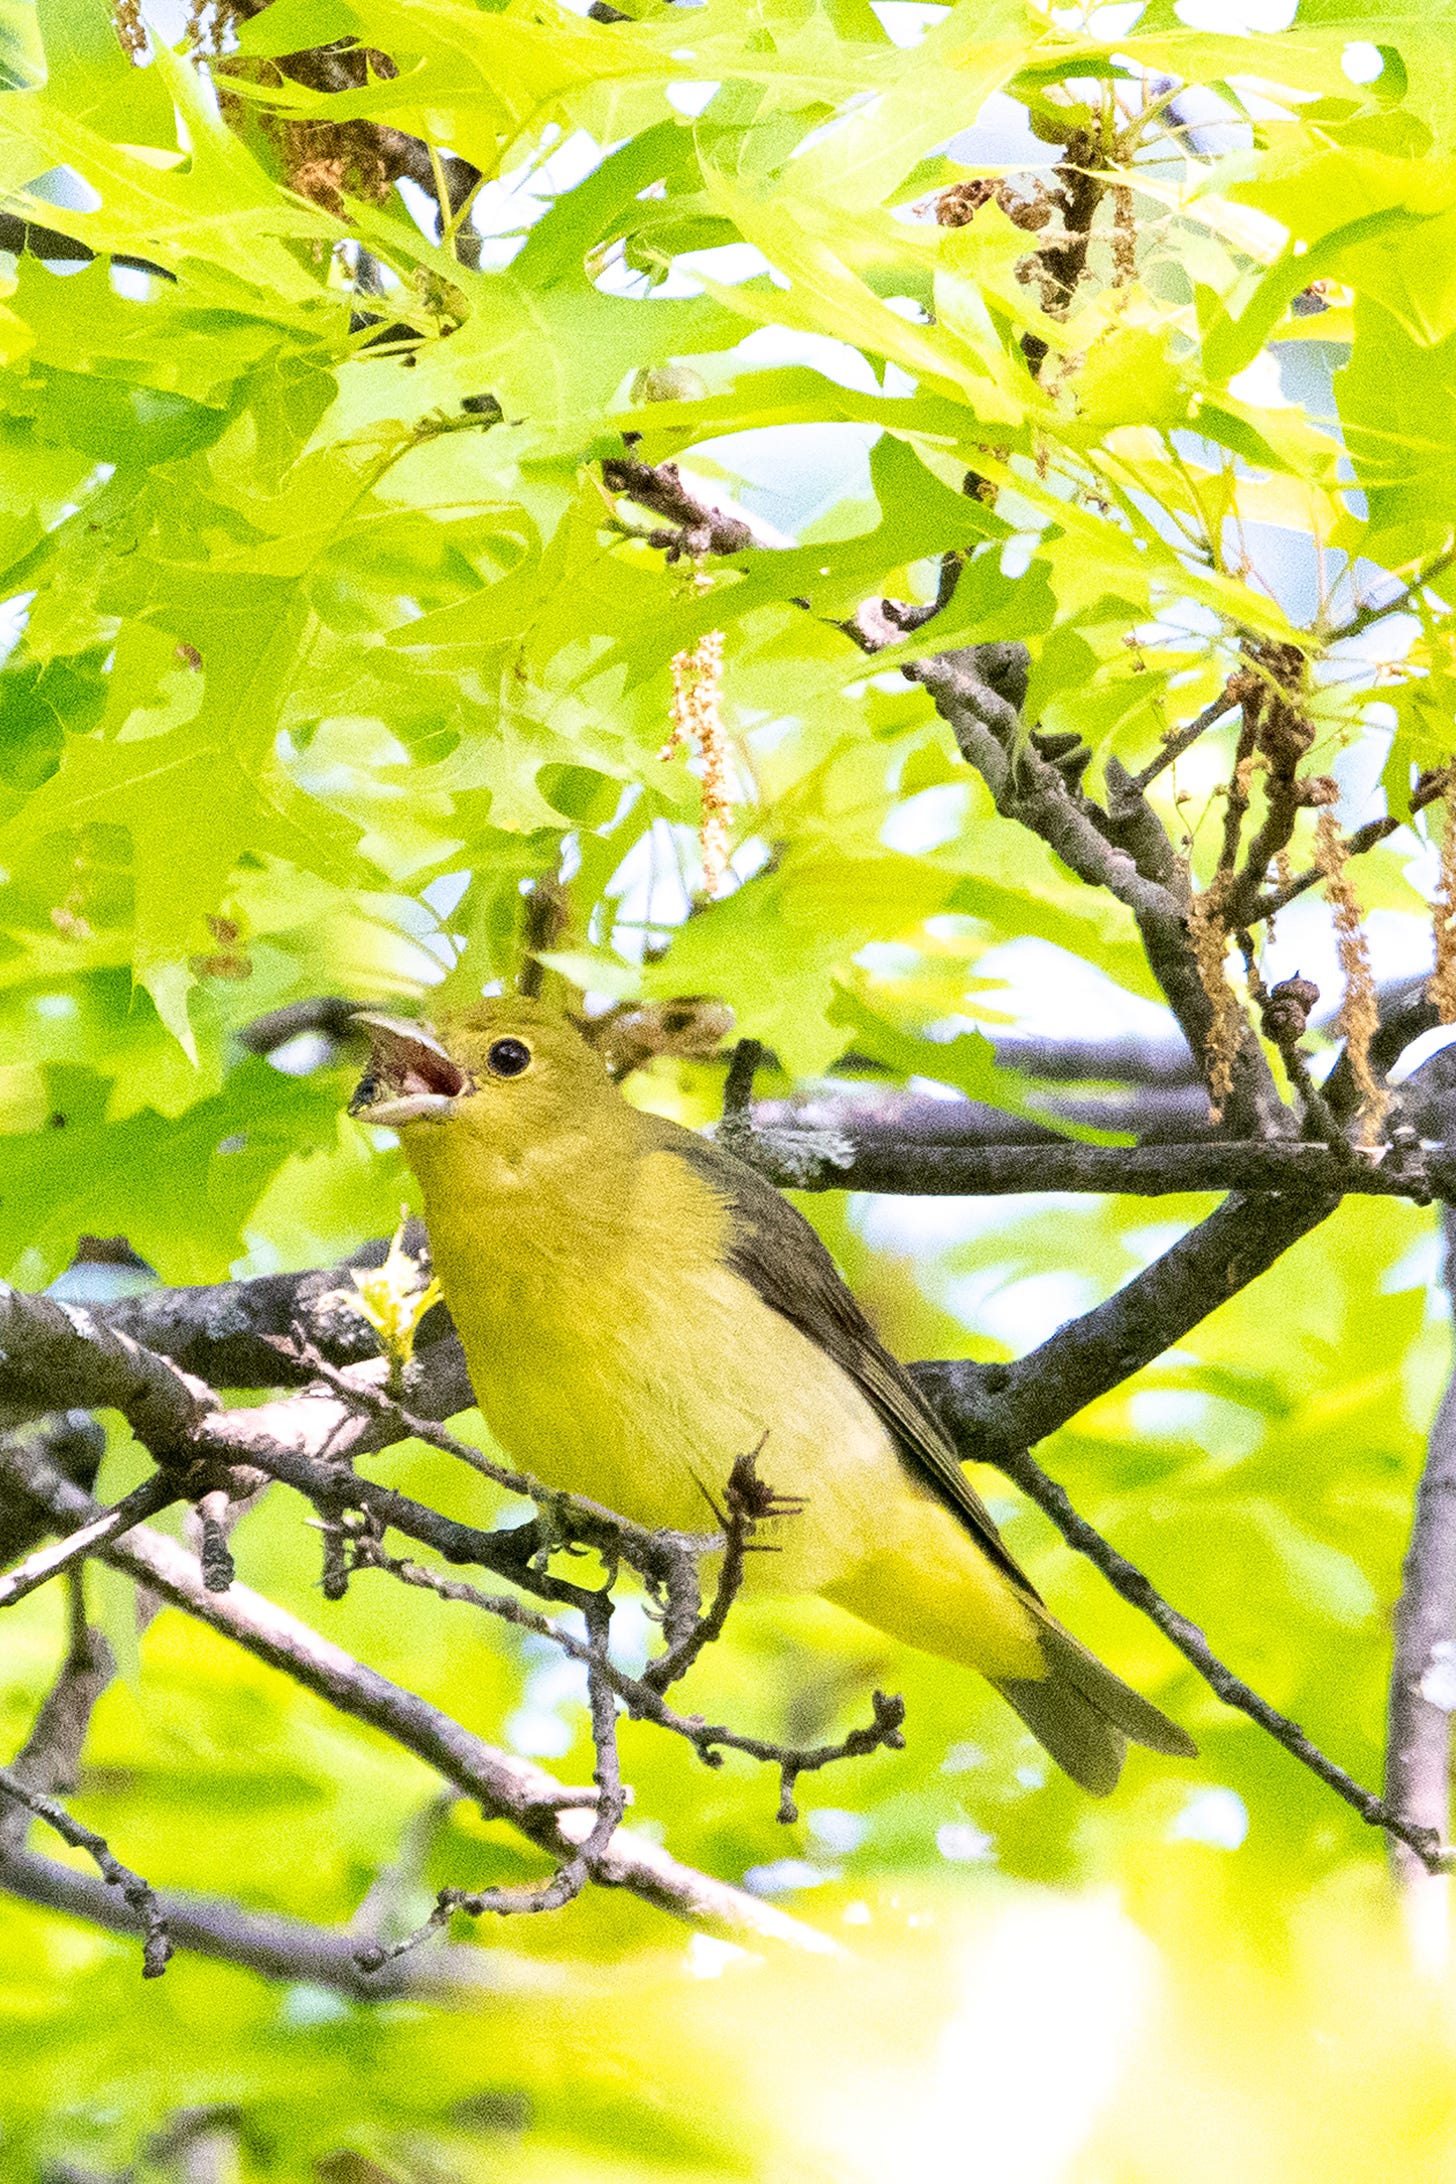 A chartreuse bird with grayish-brown wings, its beak wide open as it swallows a bug